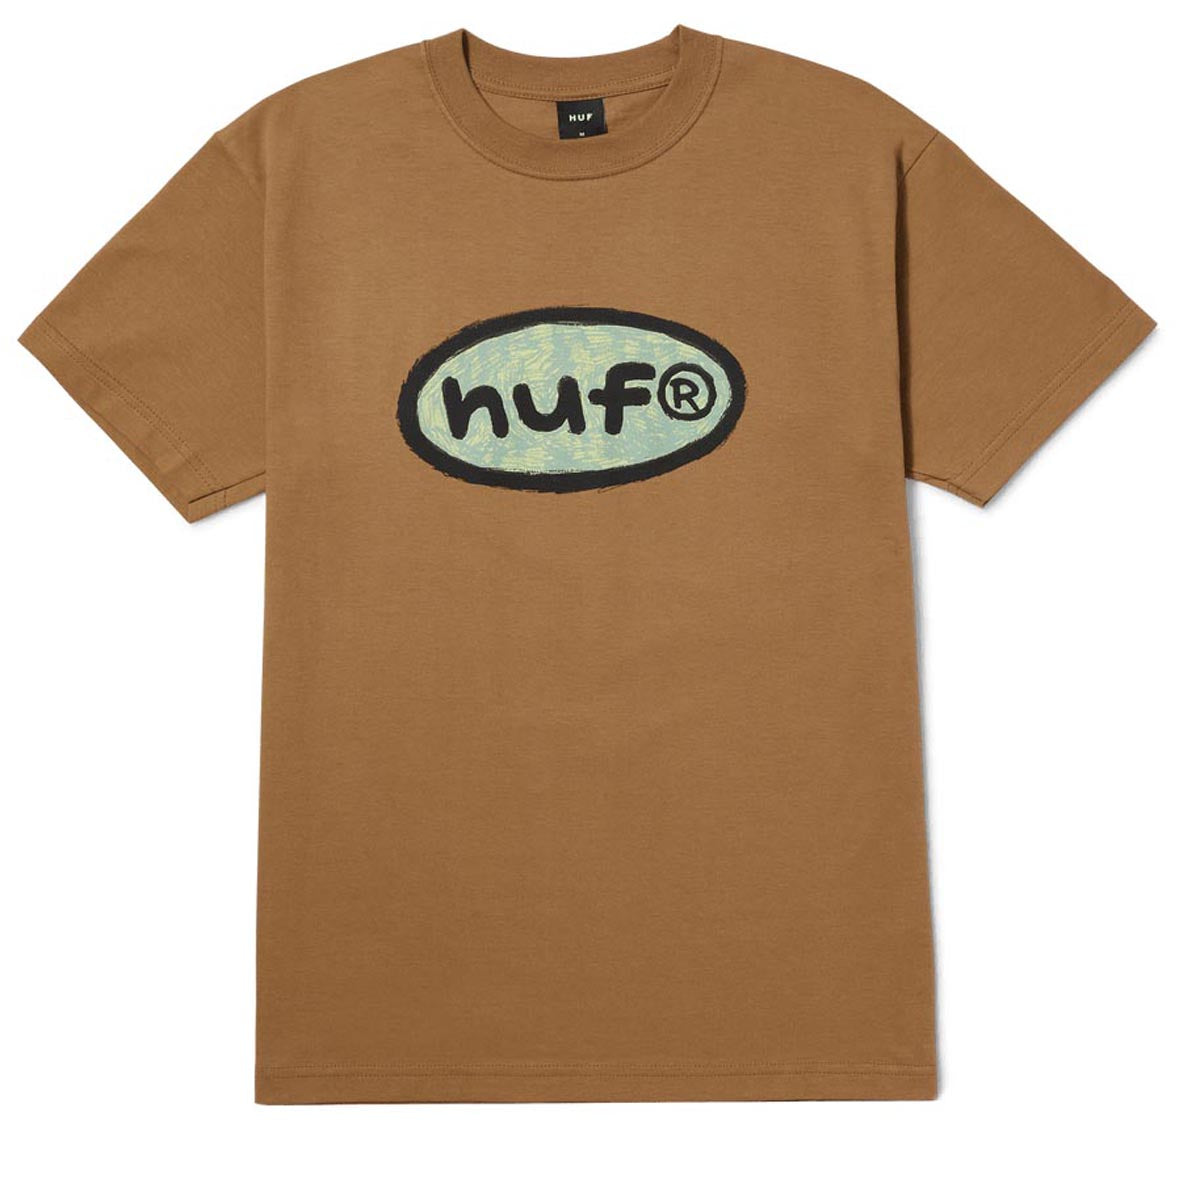 HUF Pencilled In T-Shirt - Camel image 1